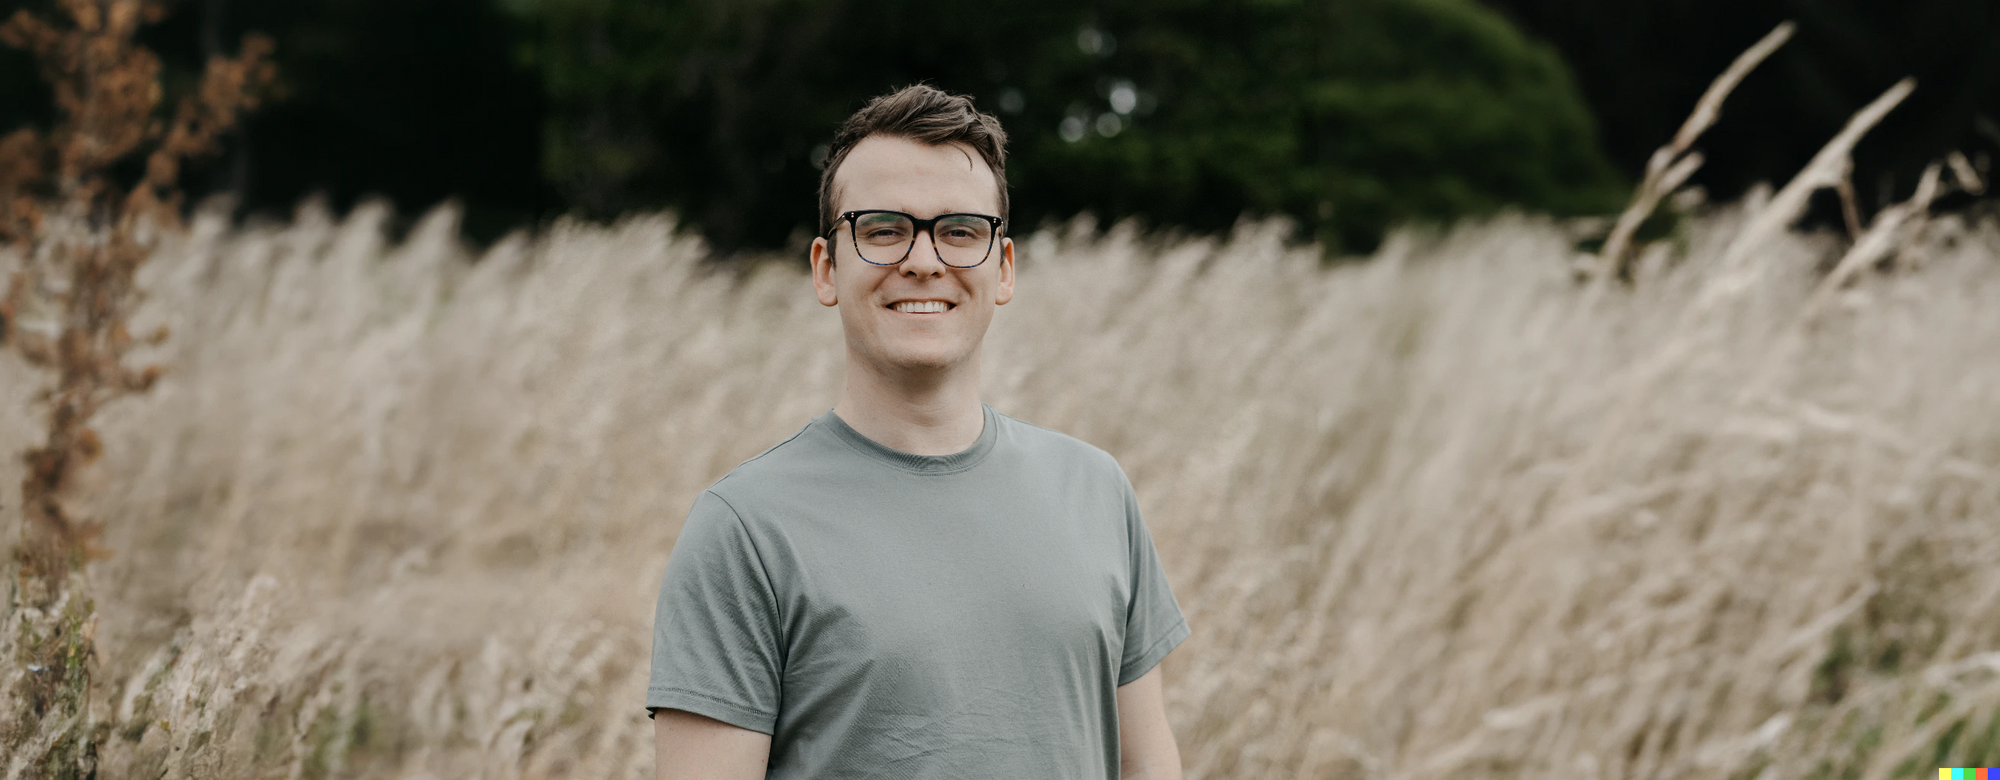 Joshua Whitcombe standing in a field